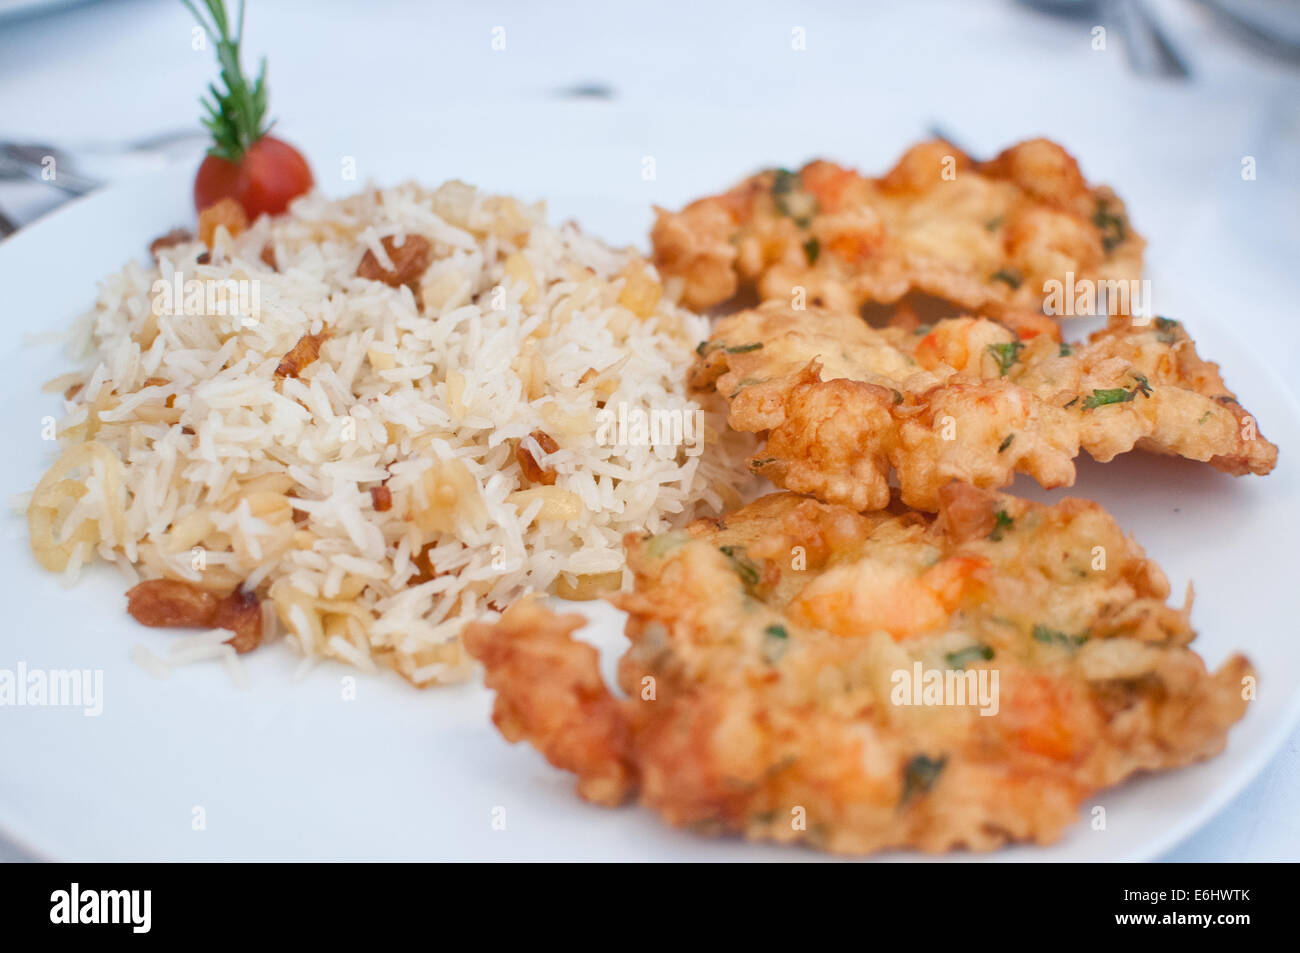 Shrimp omelette with rice Stock Photo